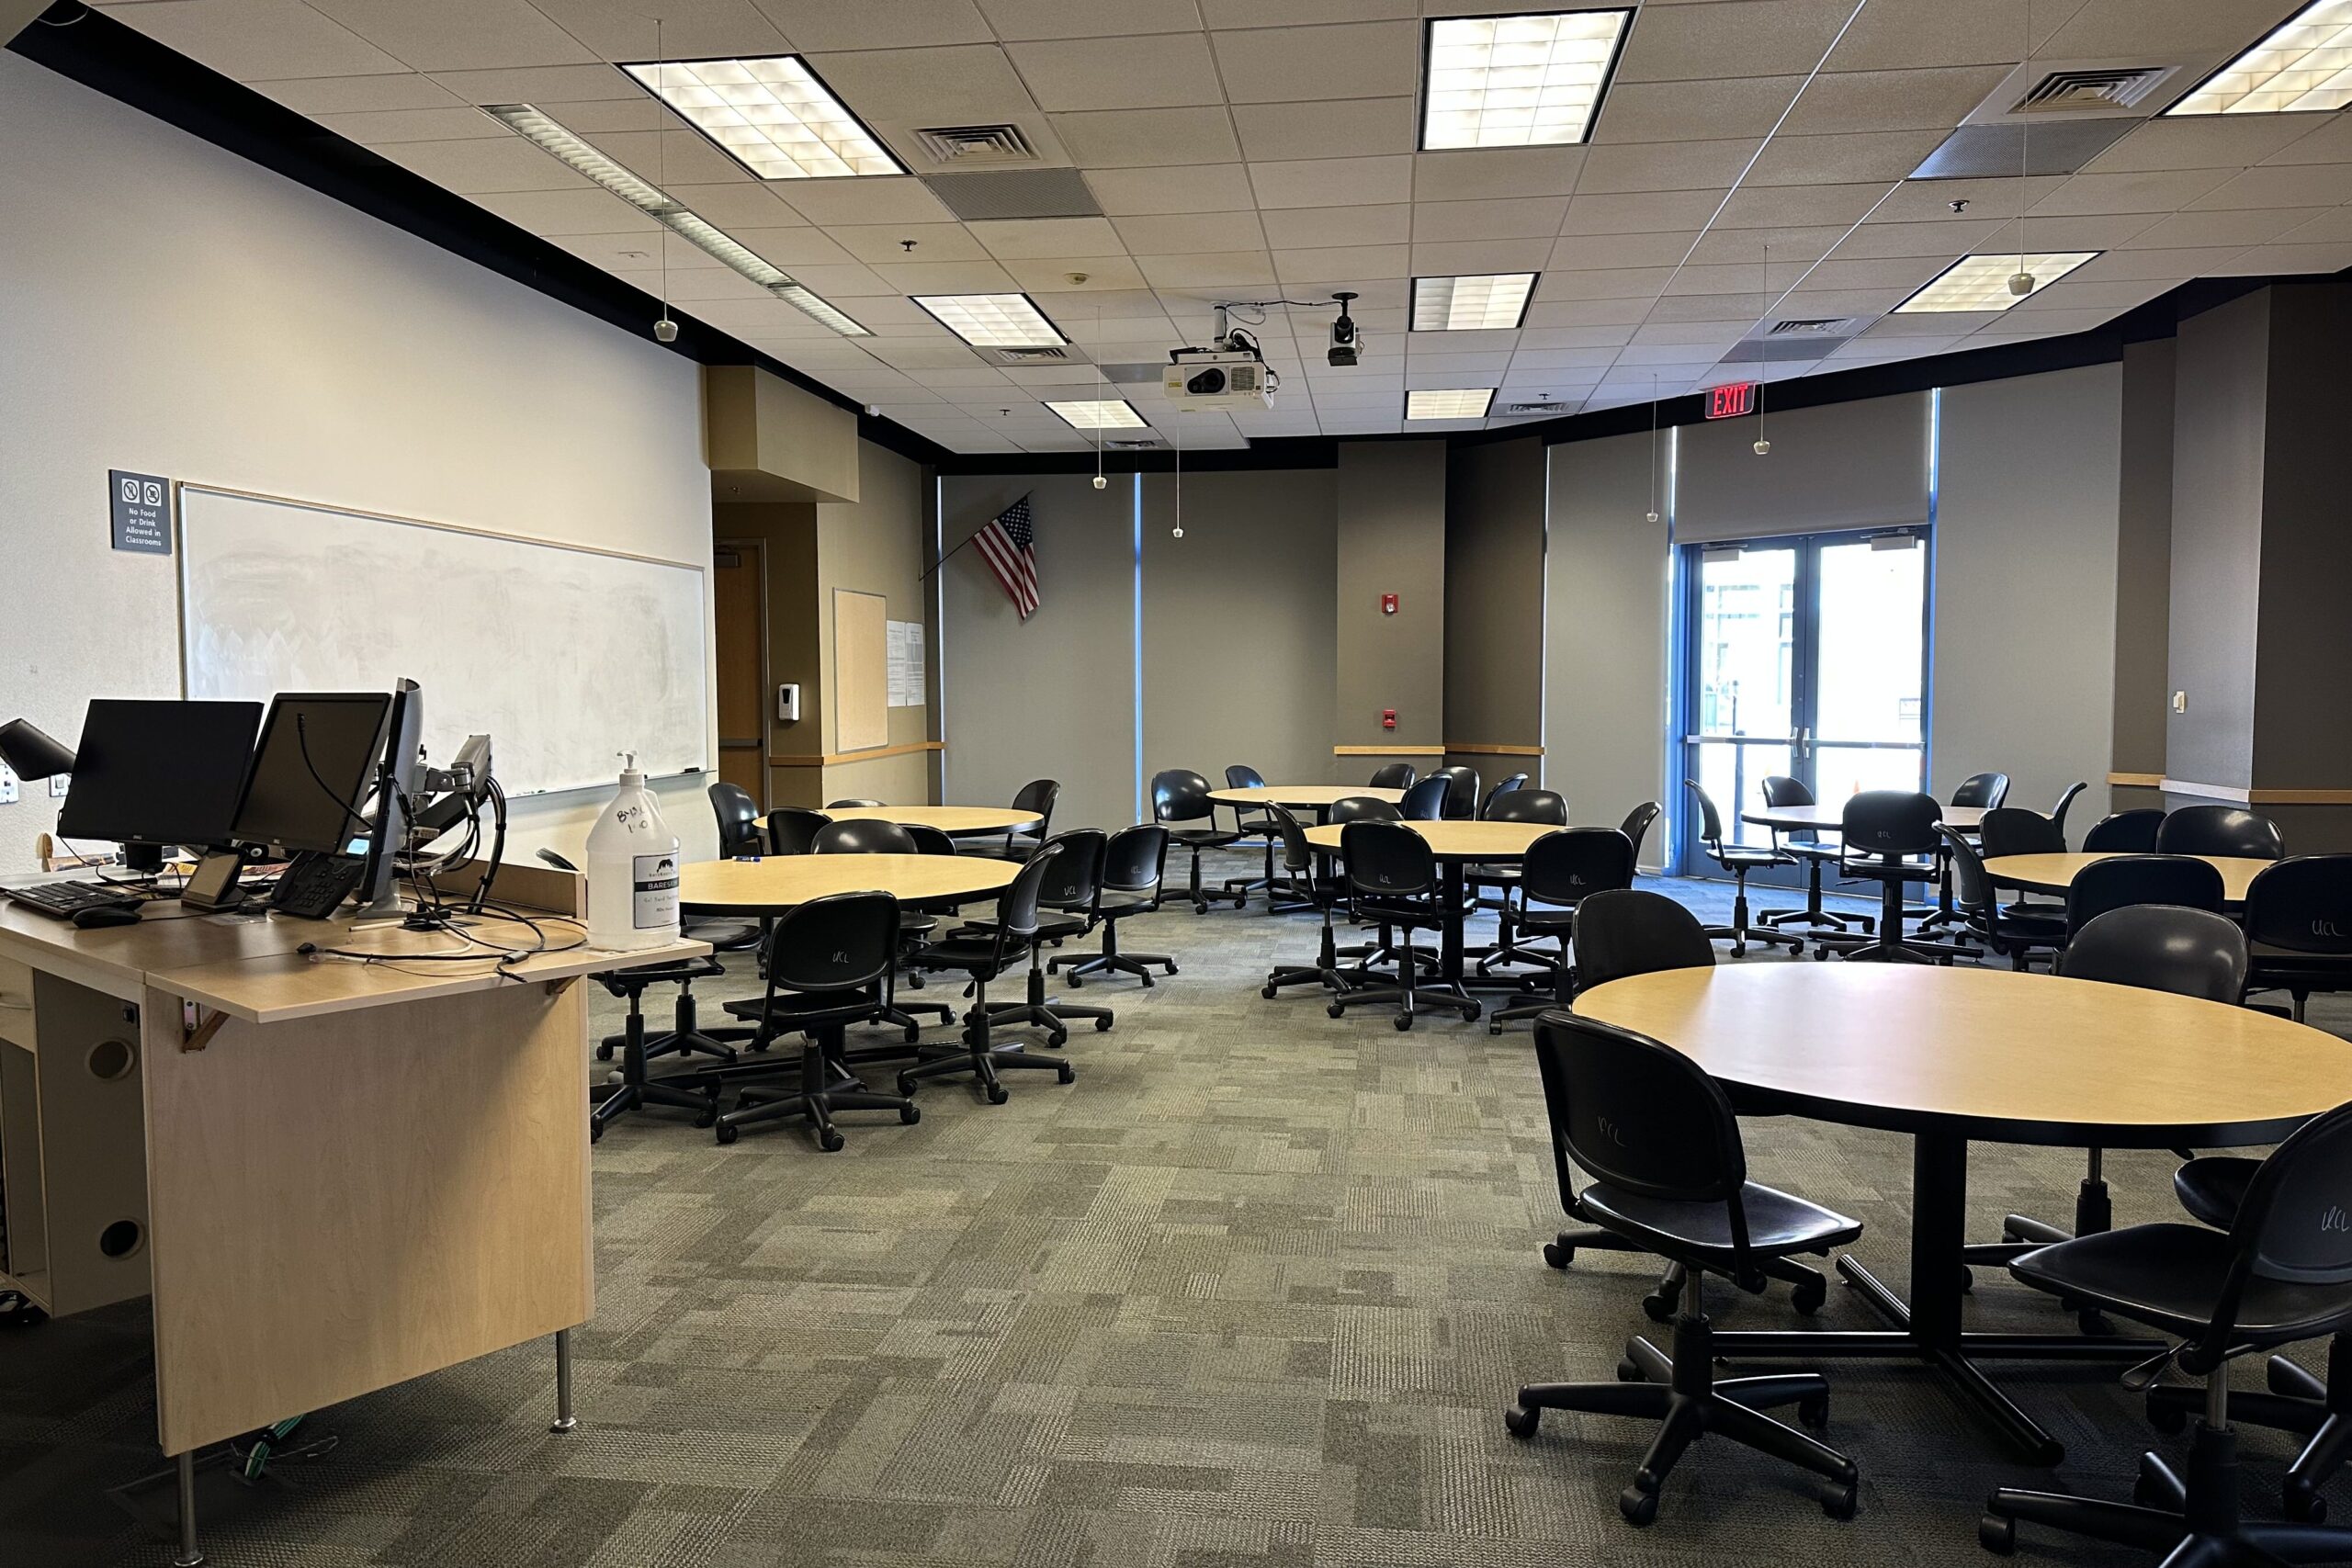 Classroom in the Brickyard building. There are seven round tables with chairs surrounding, a white board, projector and doors on the left that go into the building and to the right that exit the building.